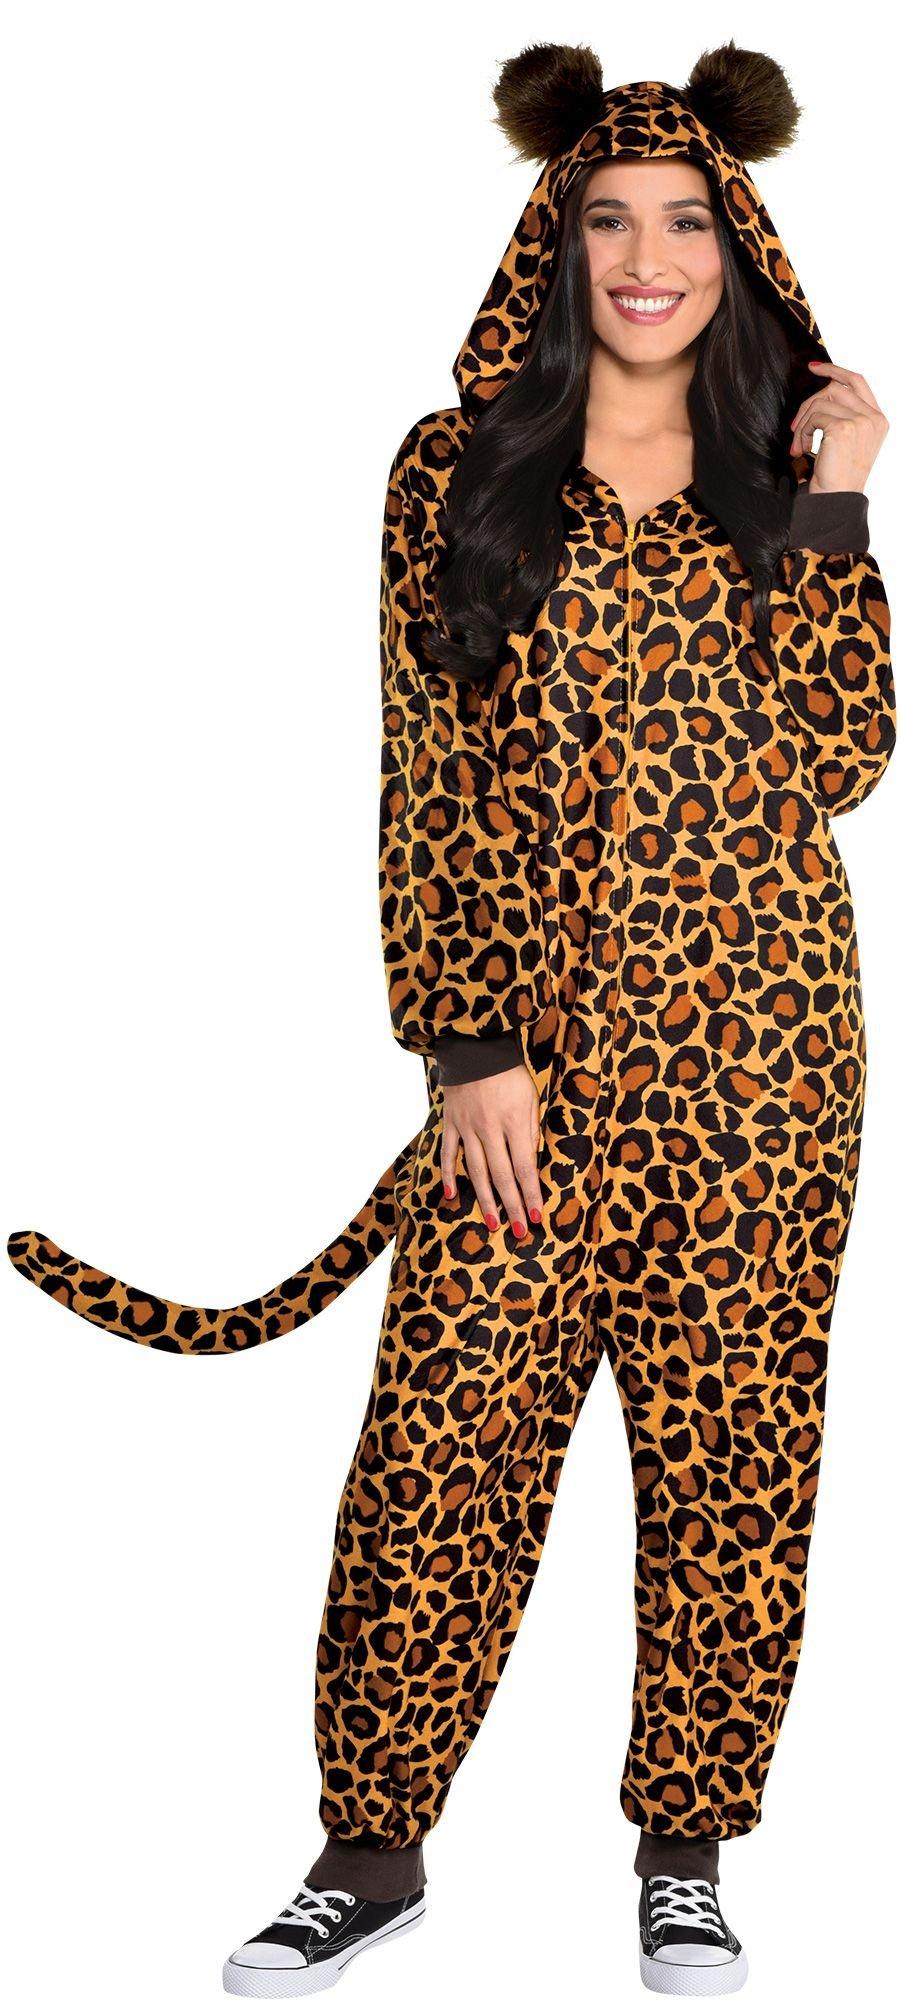 Adult Zipster Leopard Print One-Piece Costume